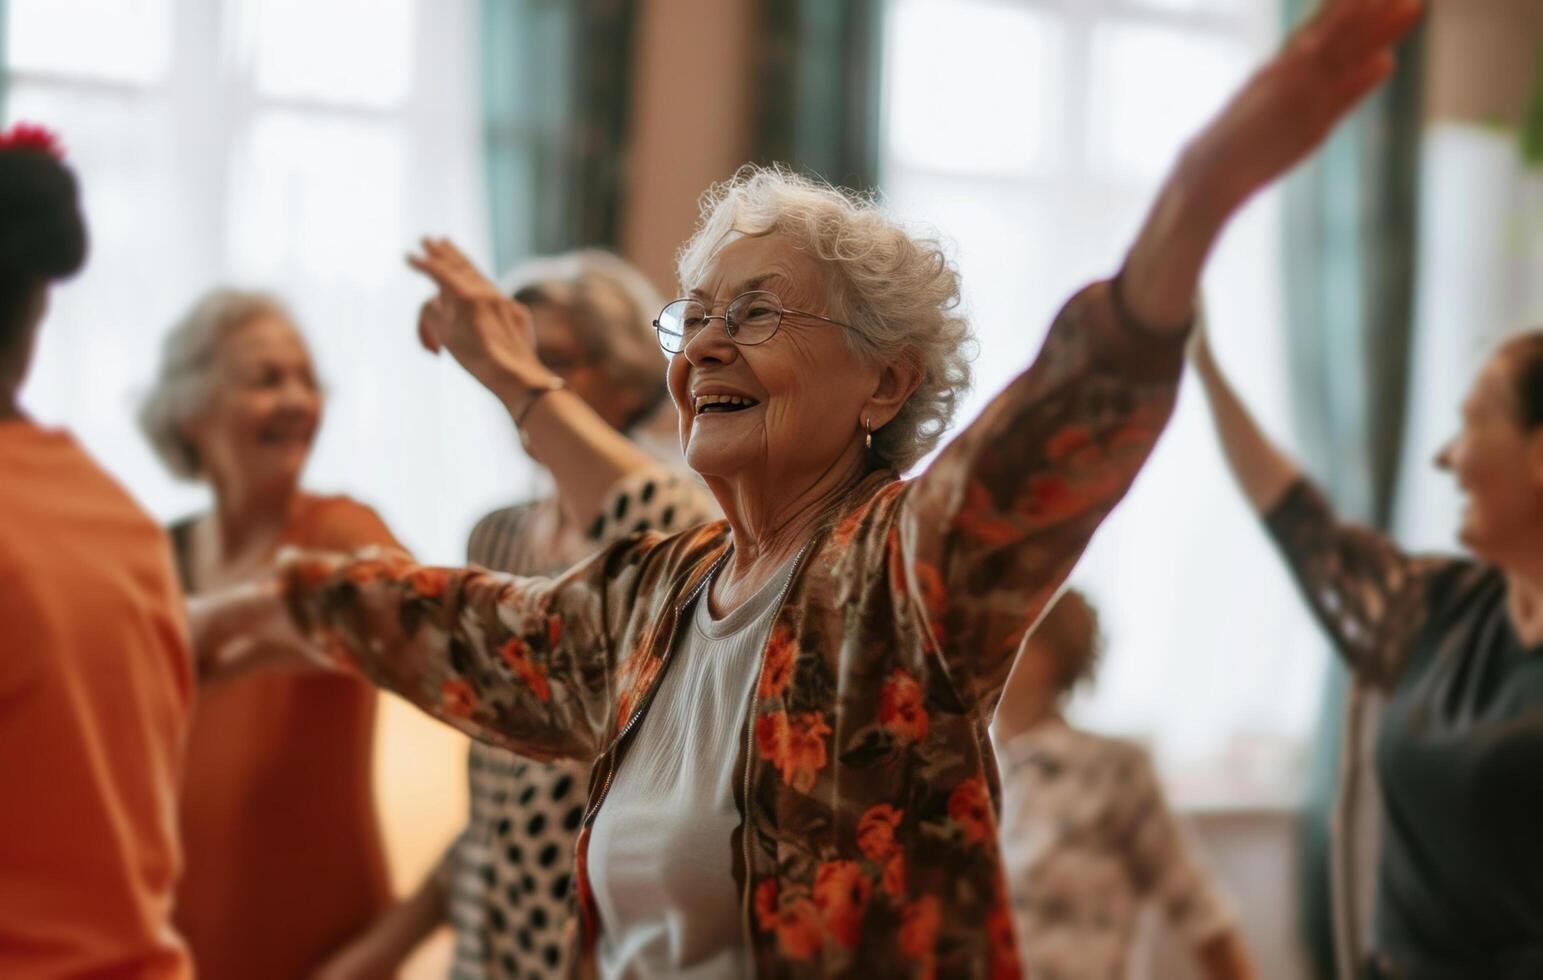 AI generated senior dance image of happy old lady dancing and dancing photo